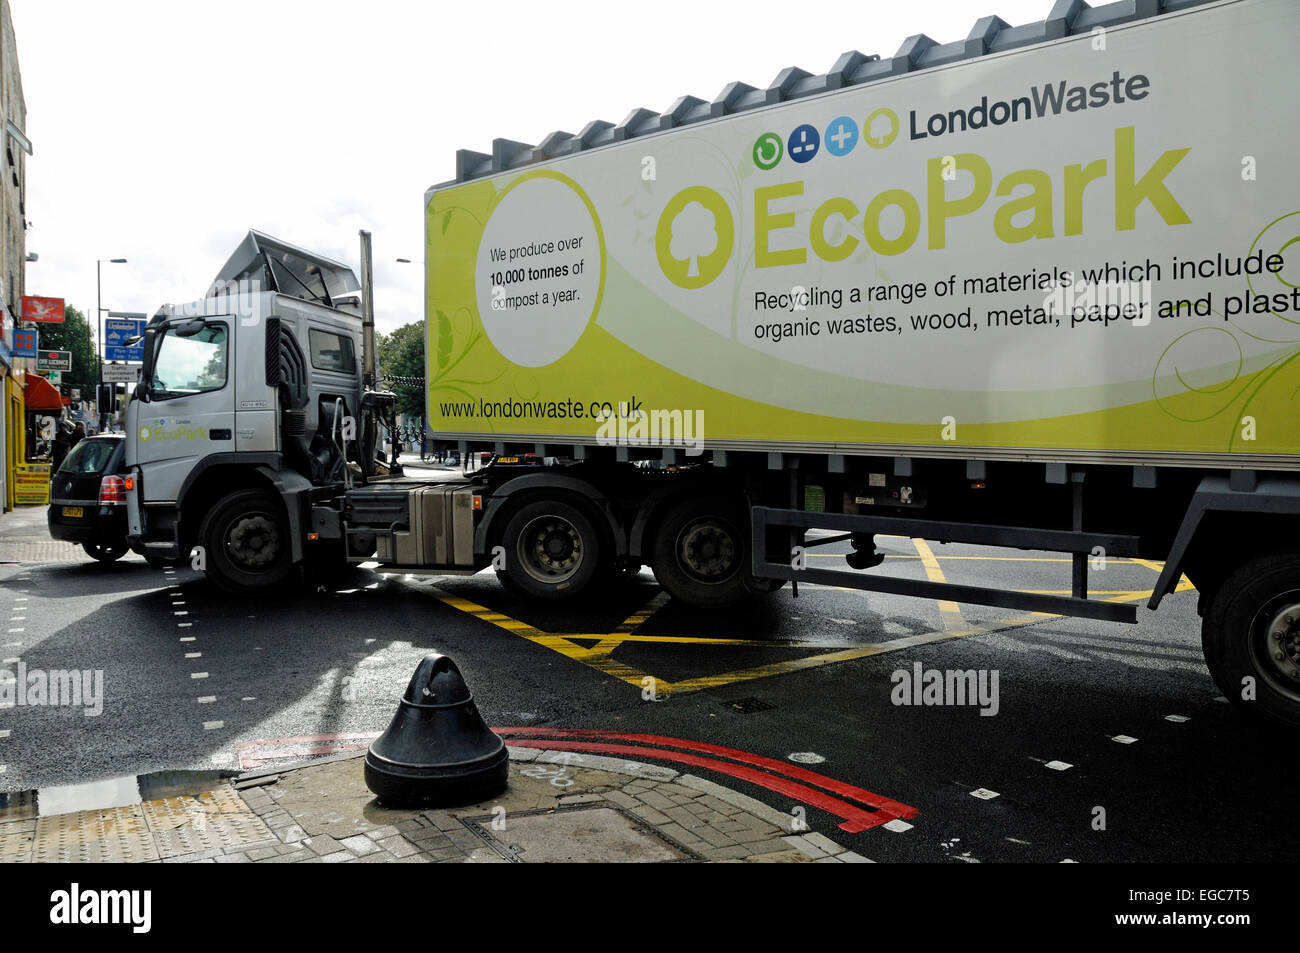 Large articulated left-turning lorry, London Waste and Eco Park on the side turning left into Drayton Park from Holloway Road Stock Photo